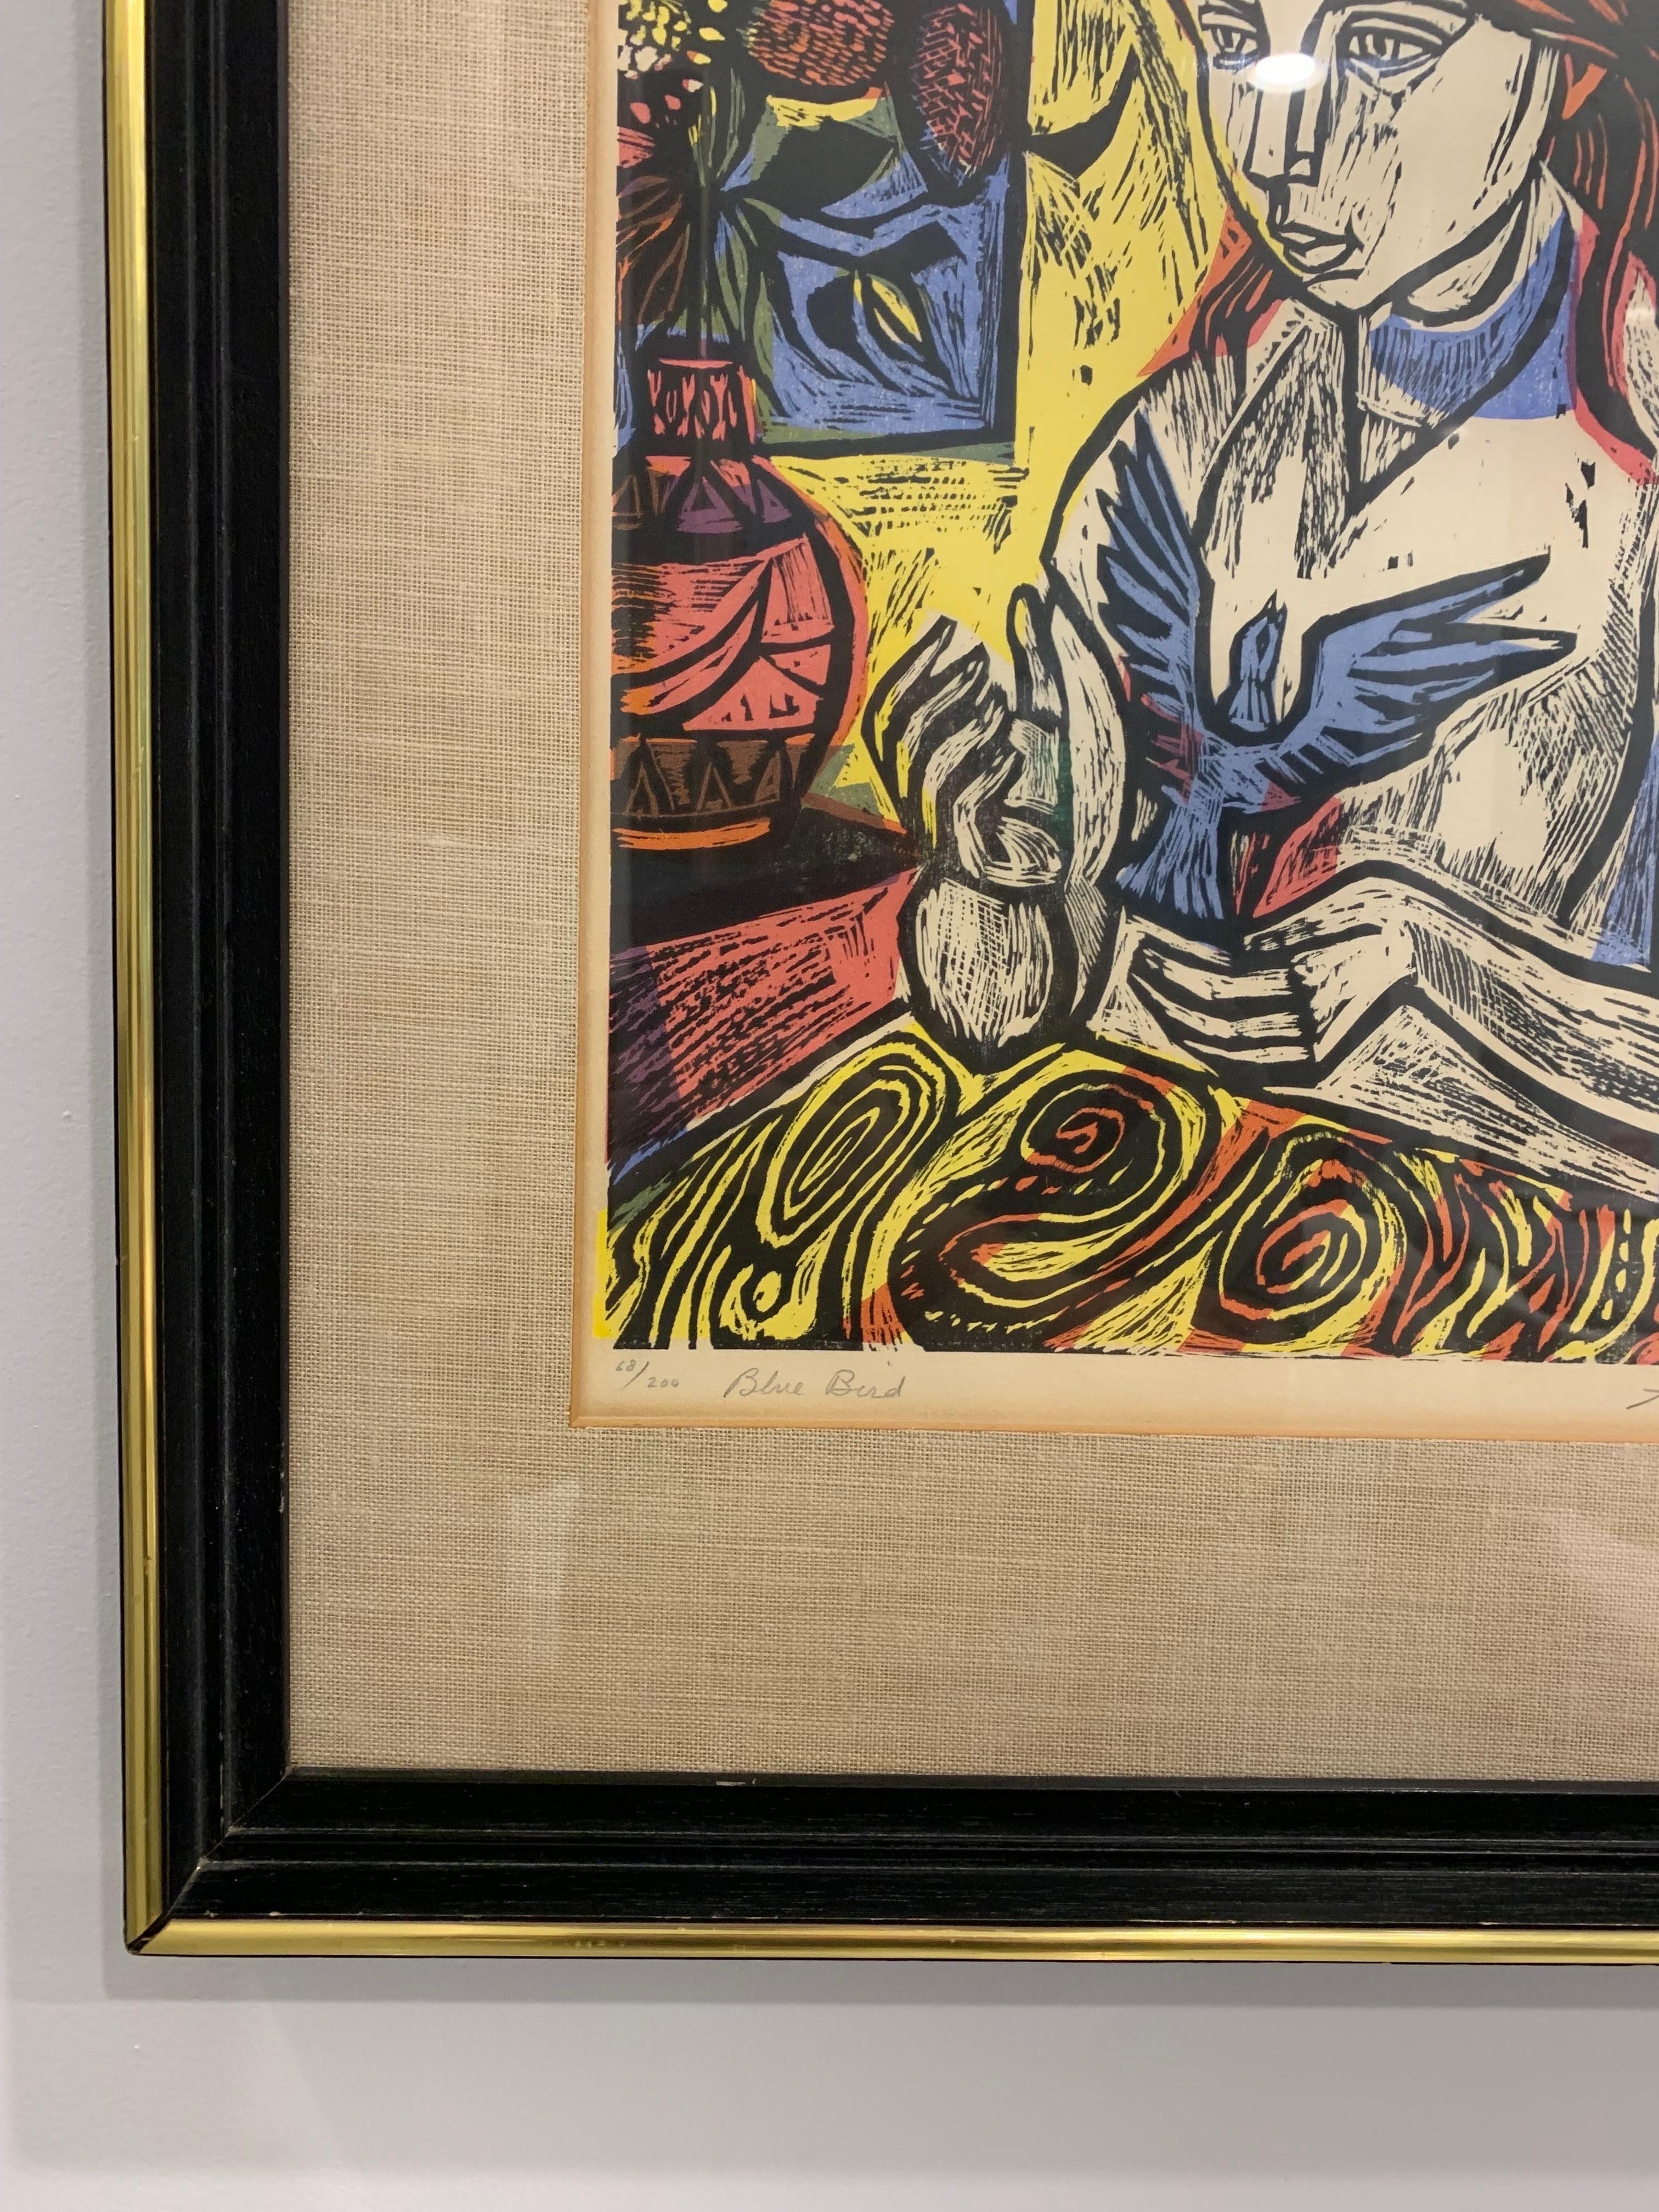 20th Century Irving Amen Signed Wood Cut Print Titled “Blue Bird” no. 68/200 For Sale